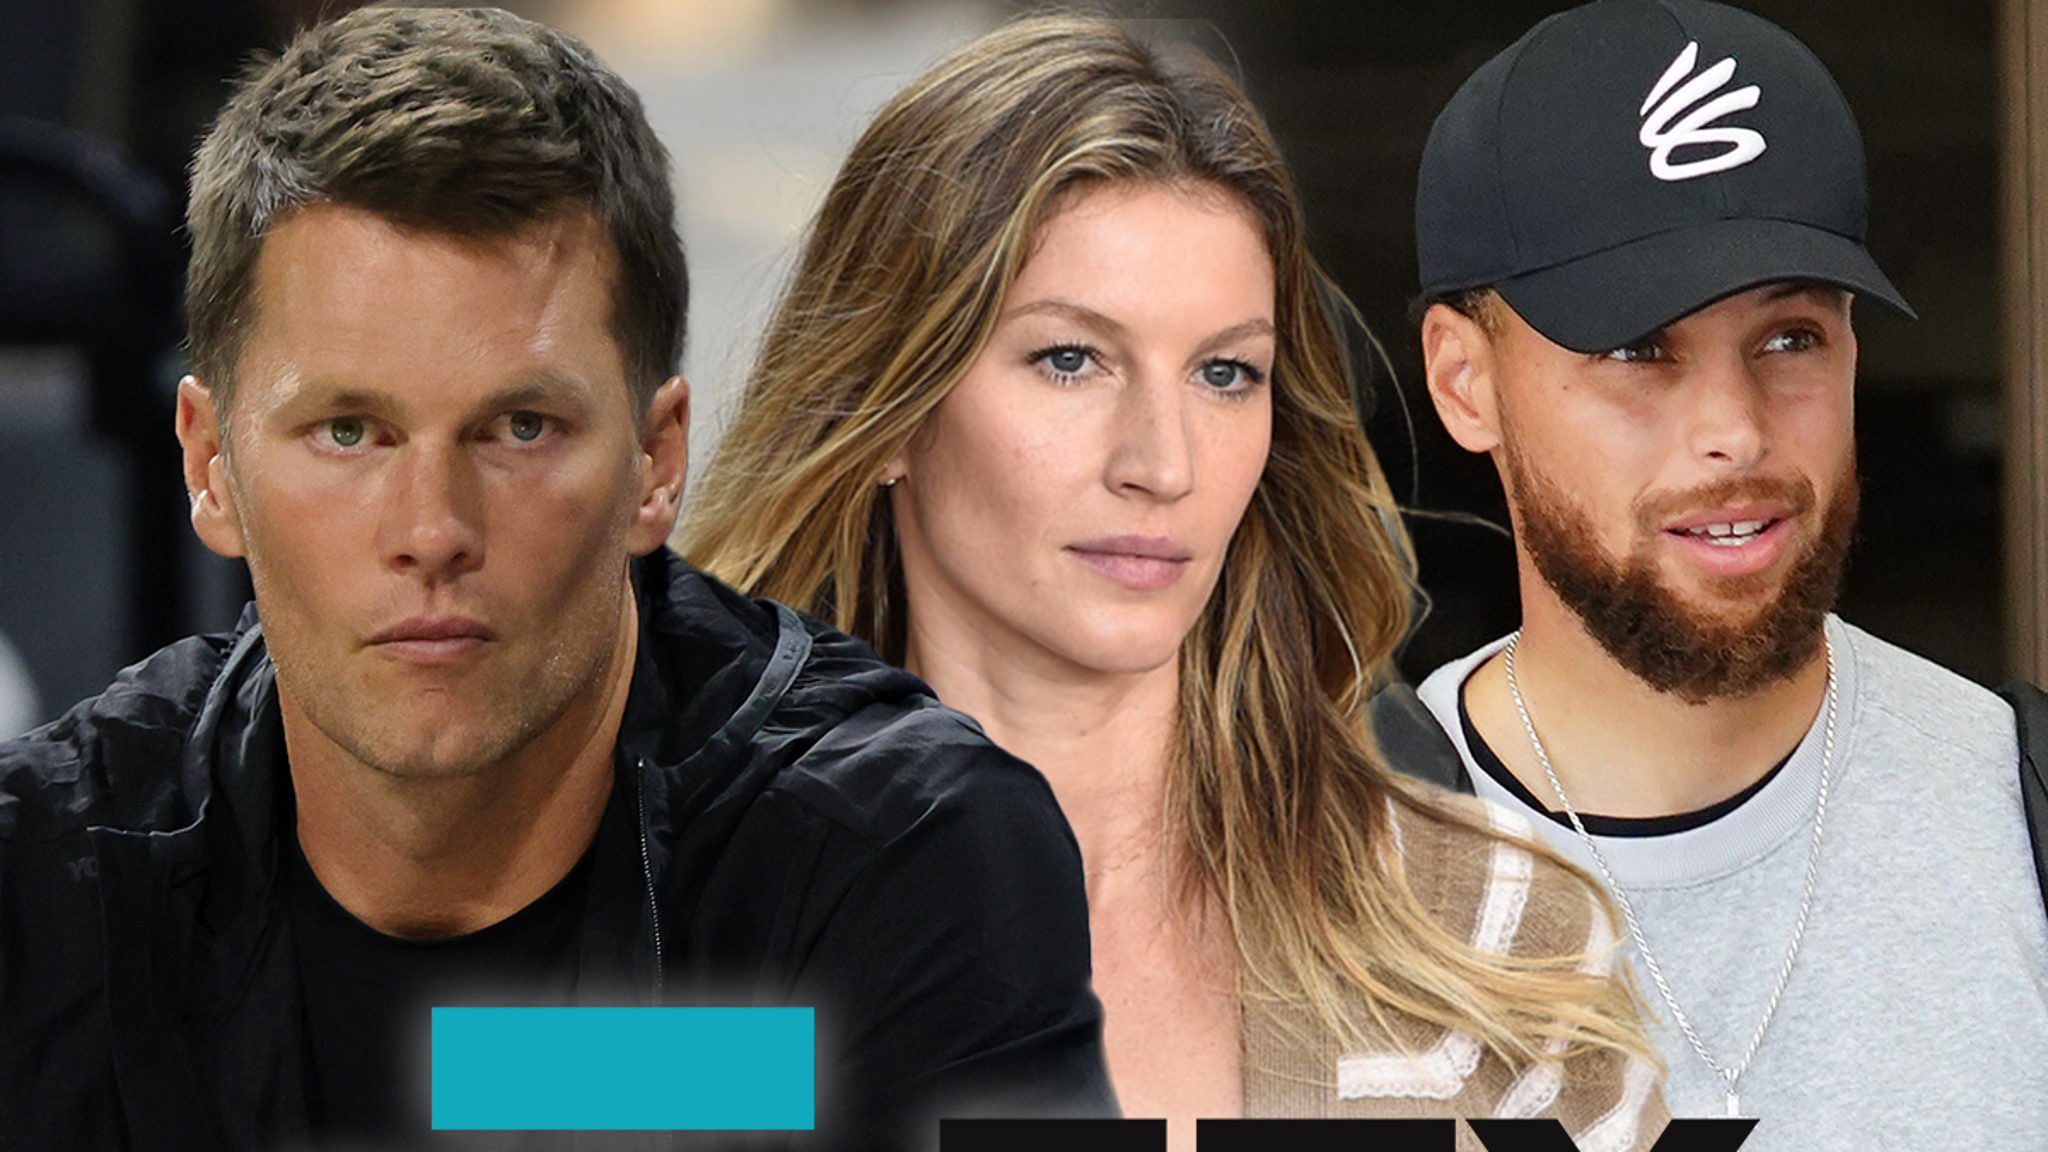 Tom Brady, Steph Curry and other celebrities face Texas